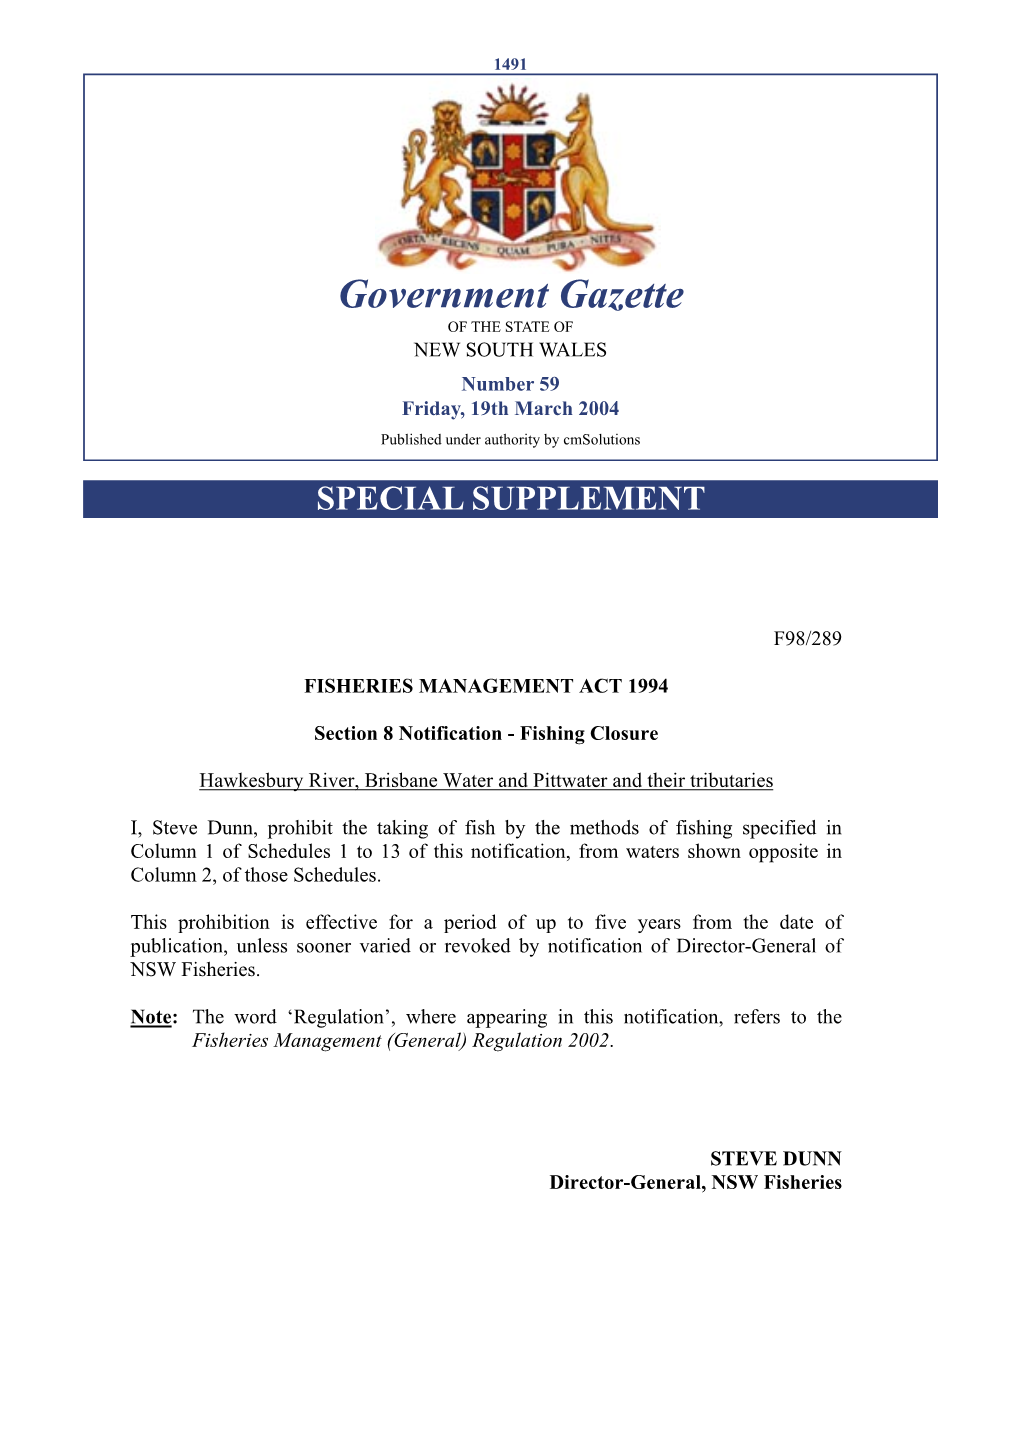 Government Gazette of the STATE of NEW SOUTH WALES Number 59 Friday, 19Th March 2004 Published Under Authority by Cmsolutions